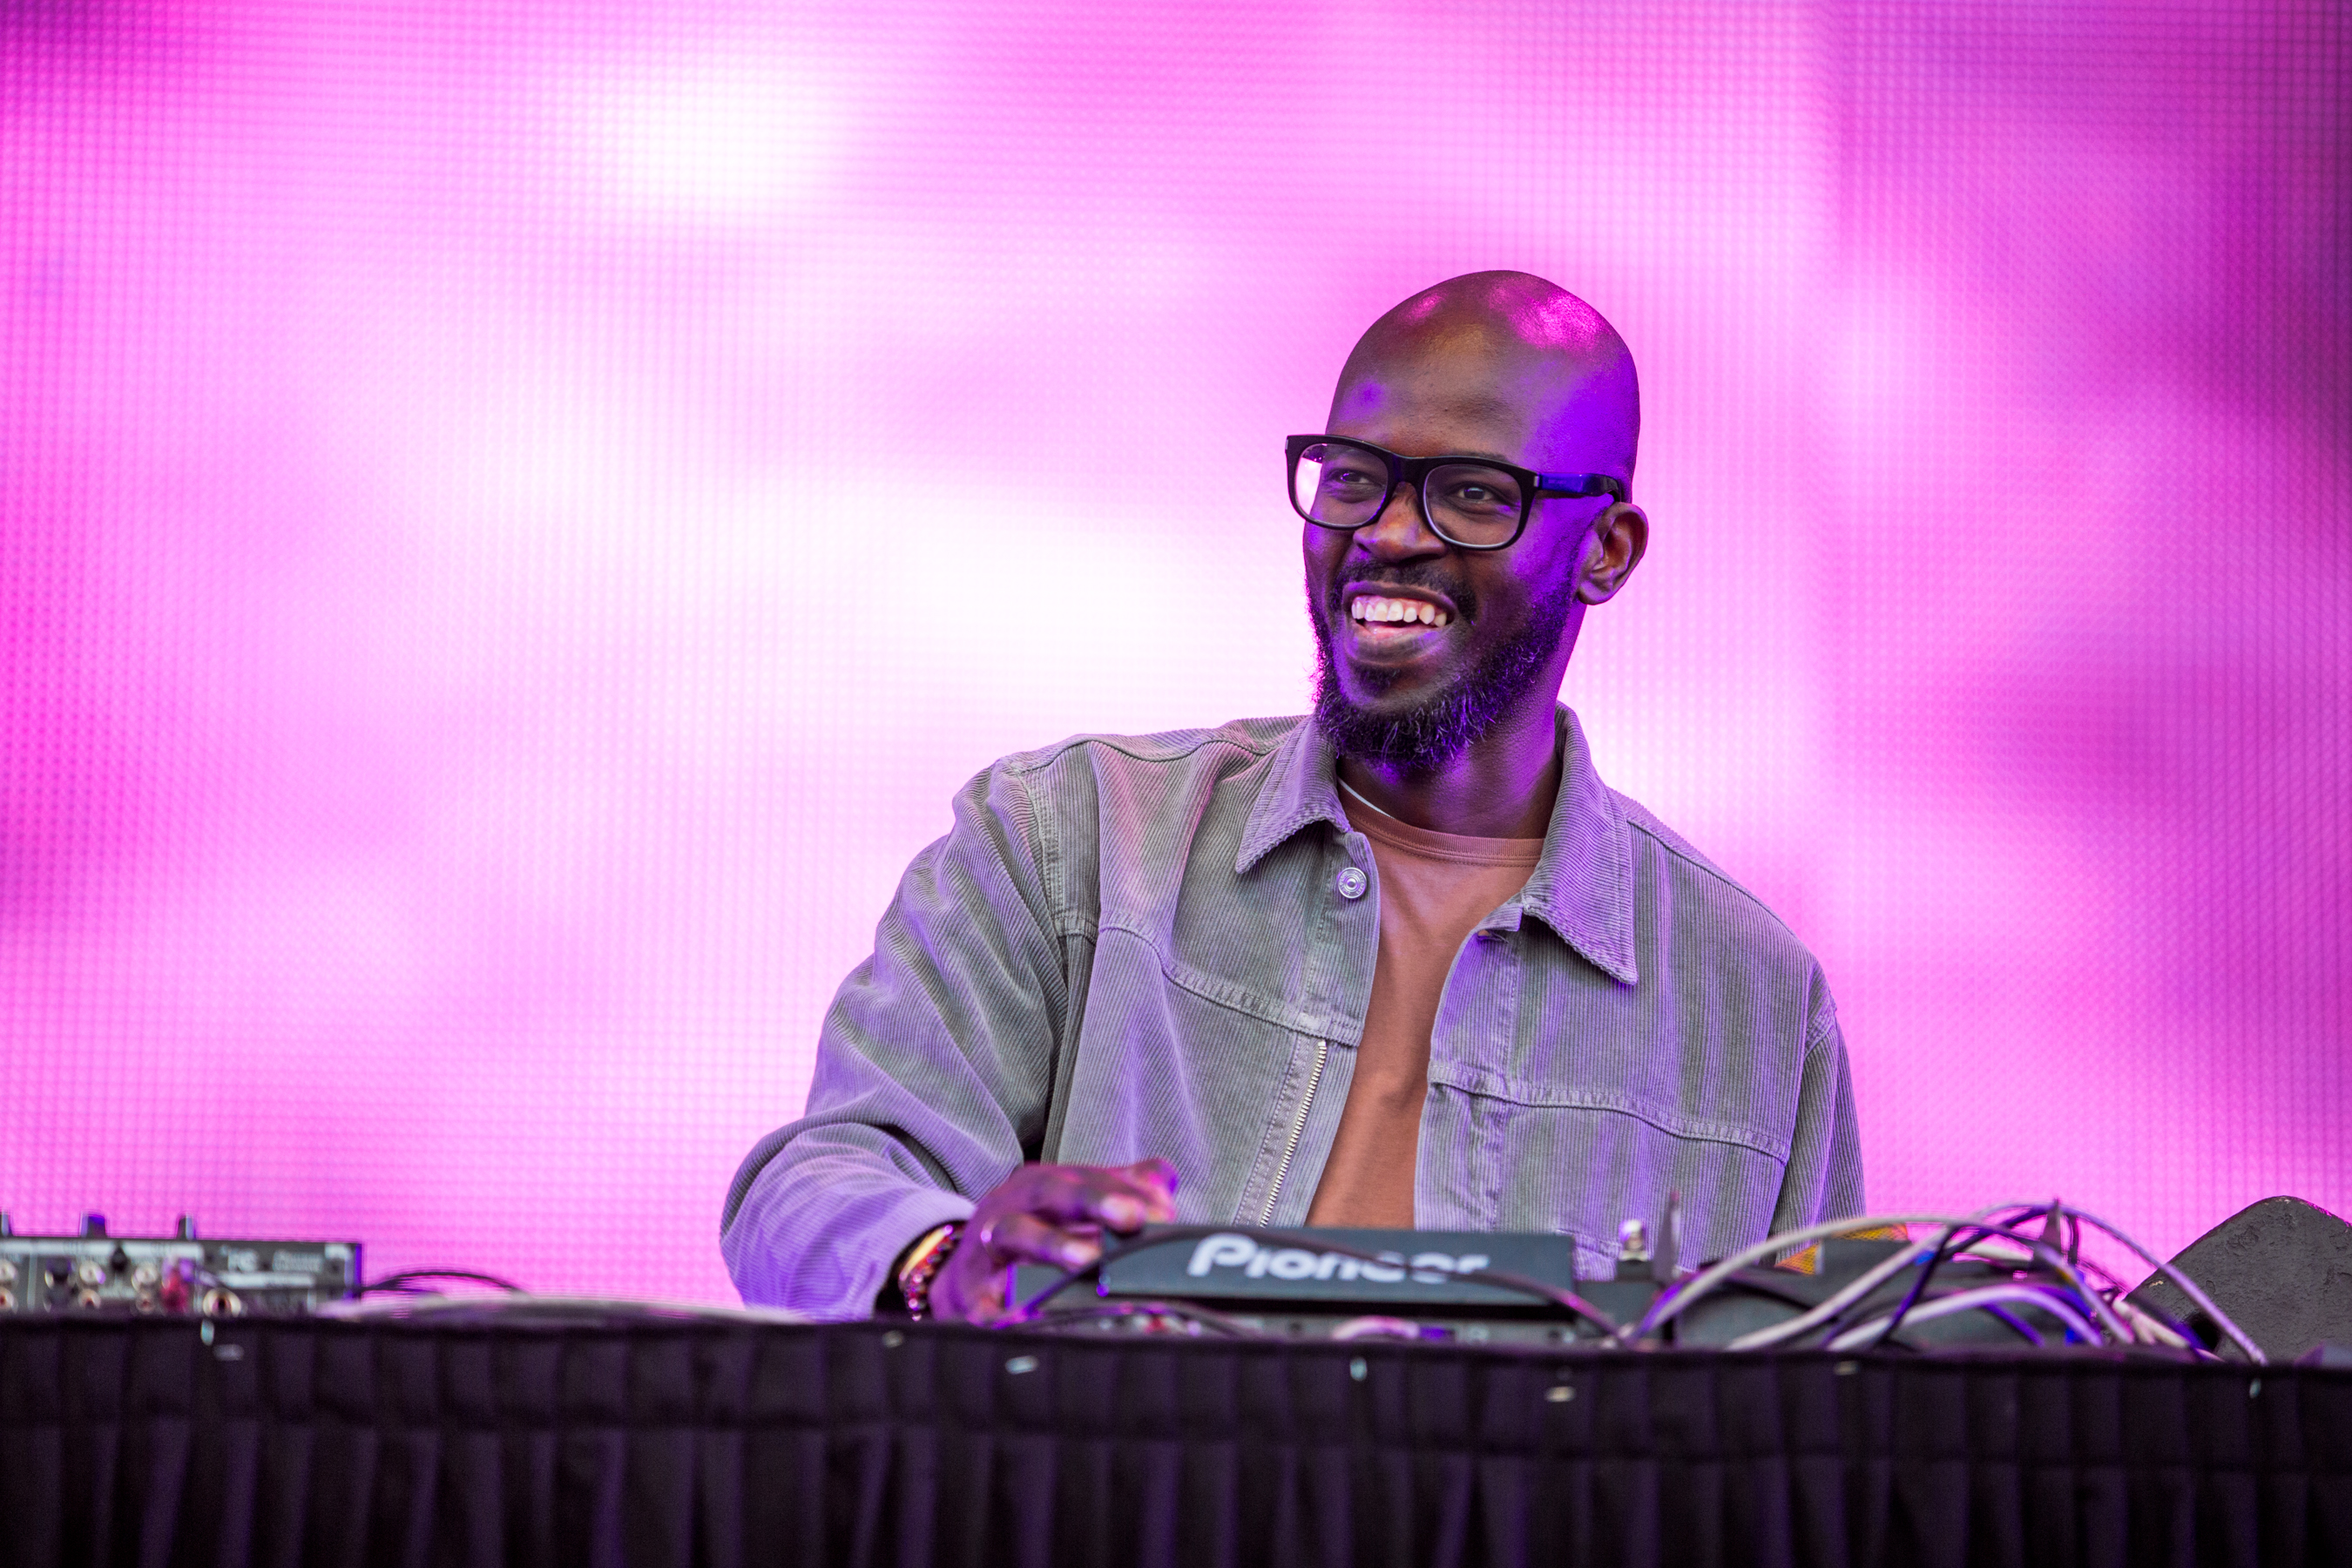 Black Coffee and David Guetta's new song Drive is a big hit in South Africa